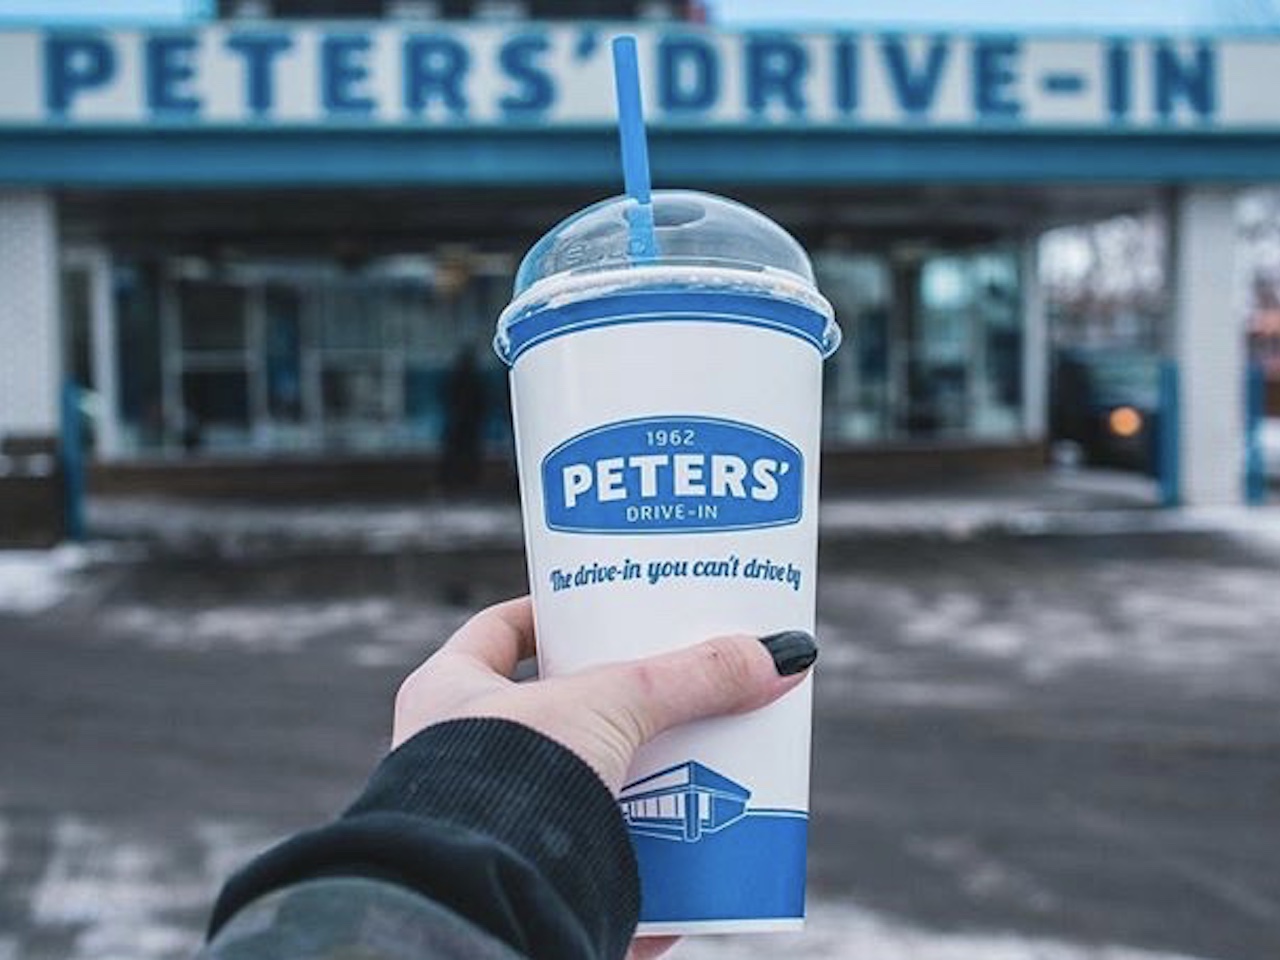 Peters' Drive-In_Grab a milkshake from this iconic fast food joint_